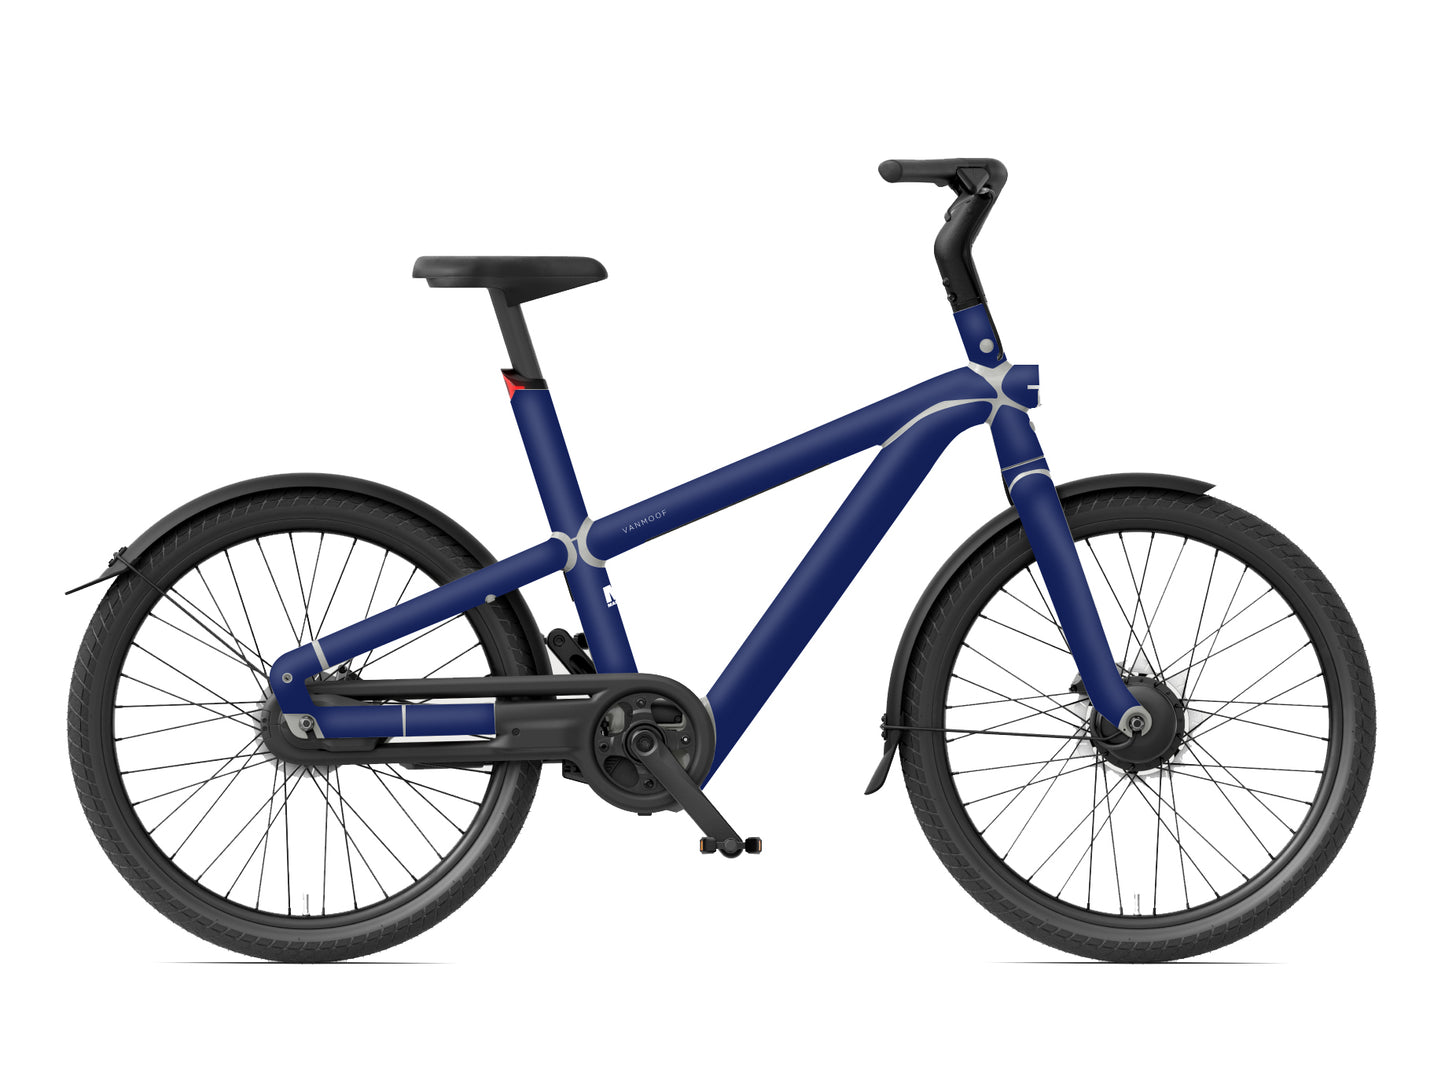 NAVY BLUE PROTECT KIT FOR VANMOOF A5